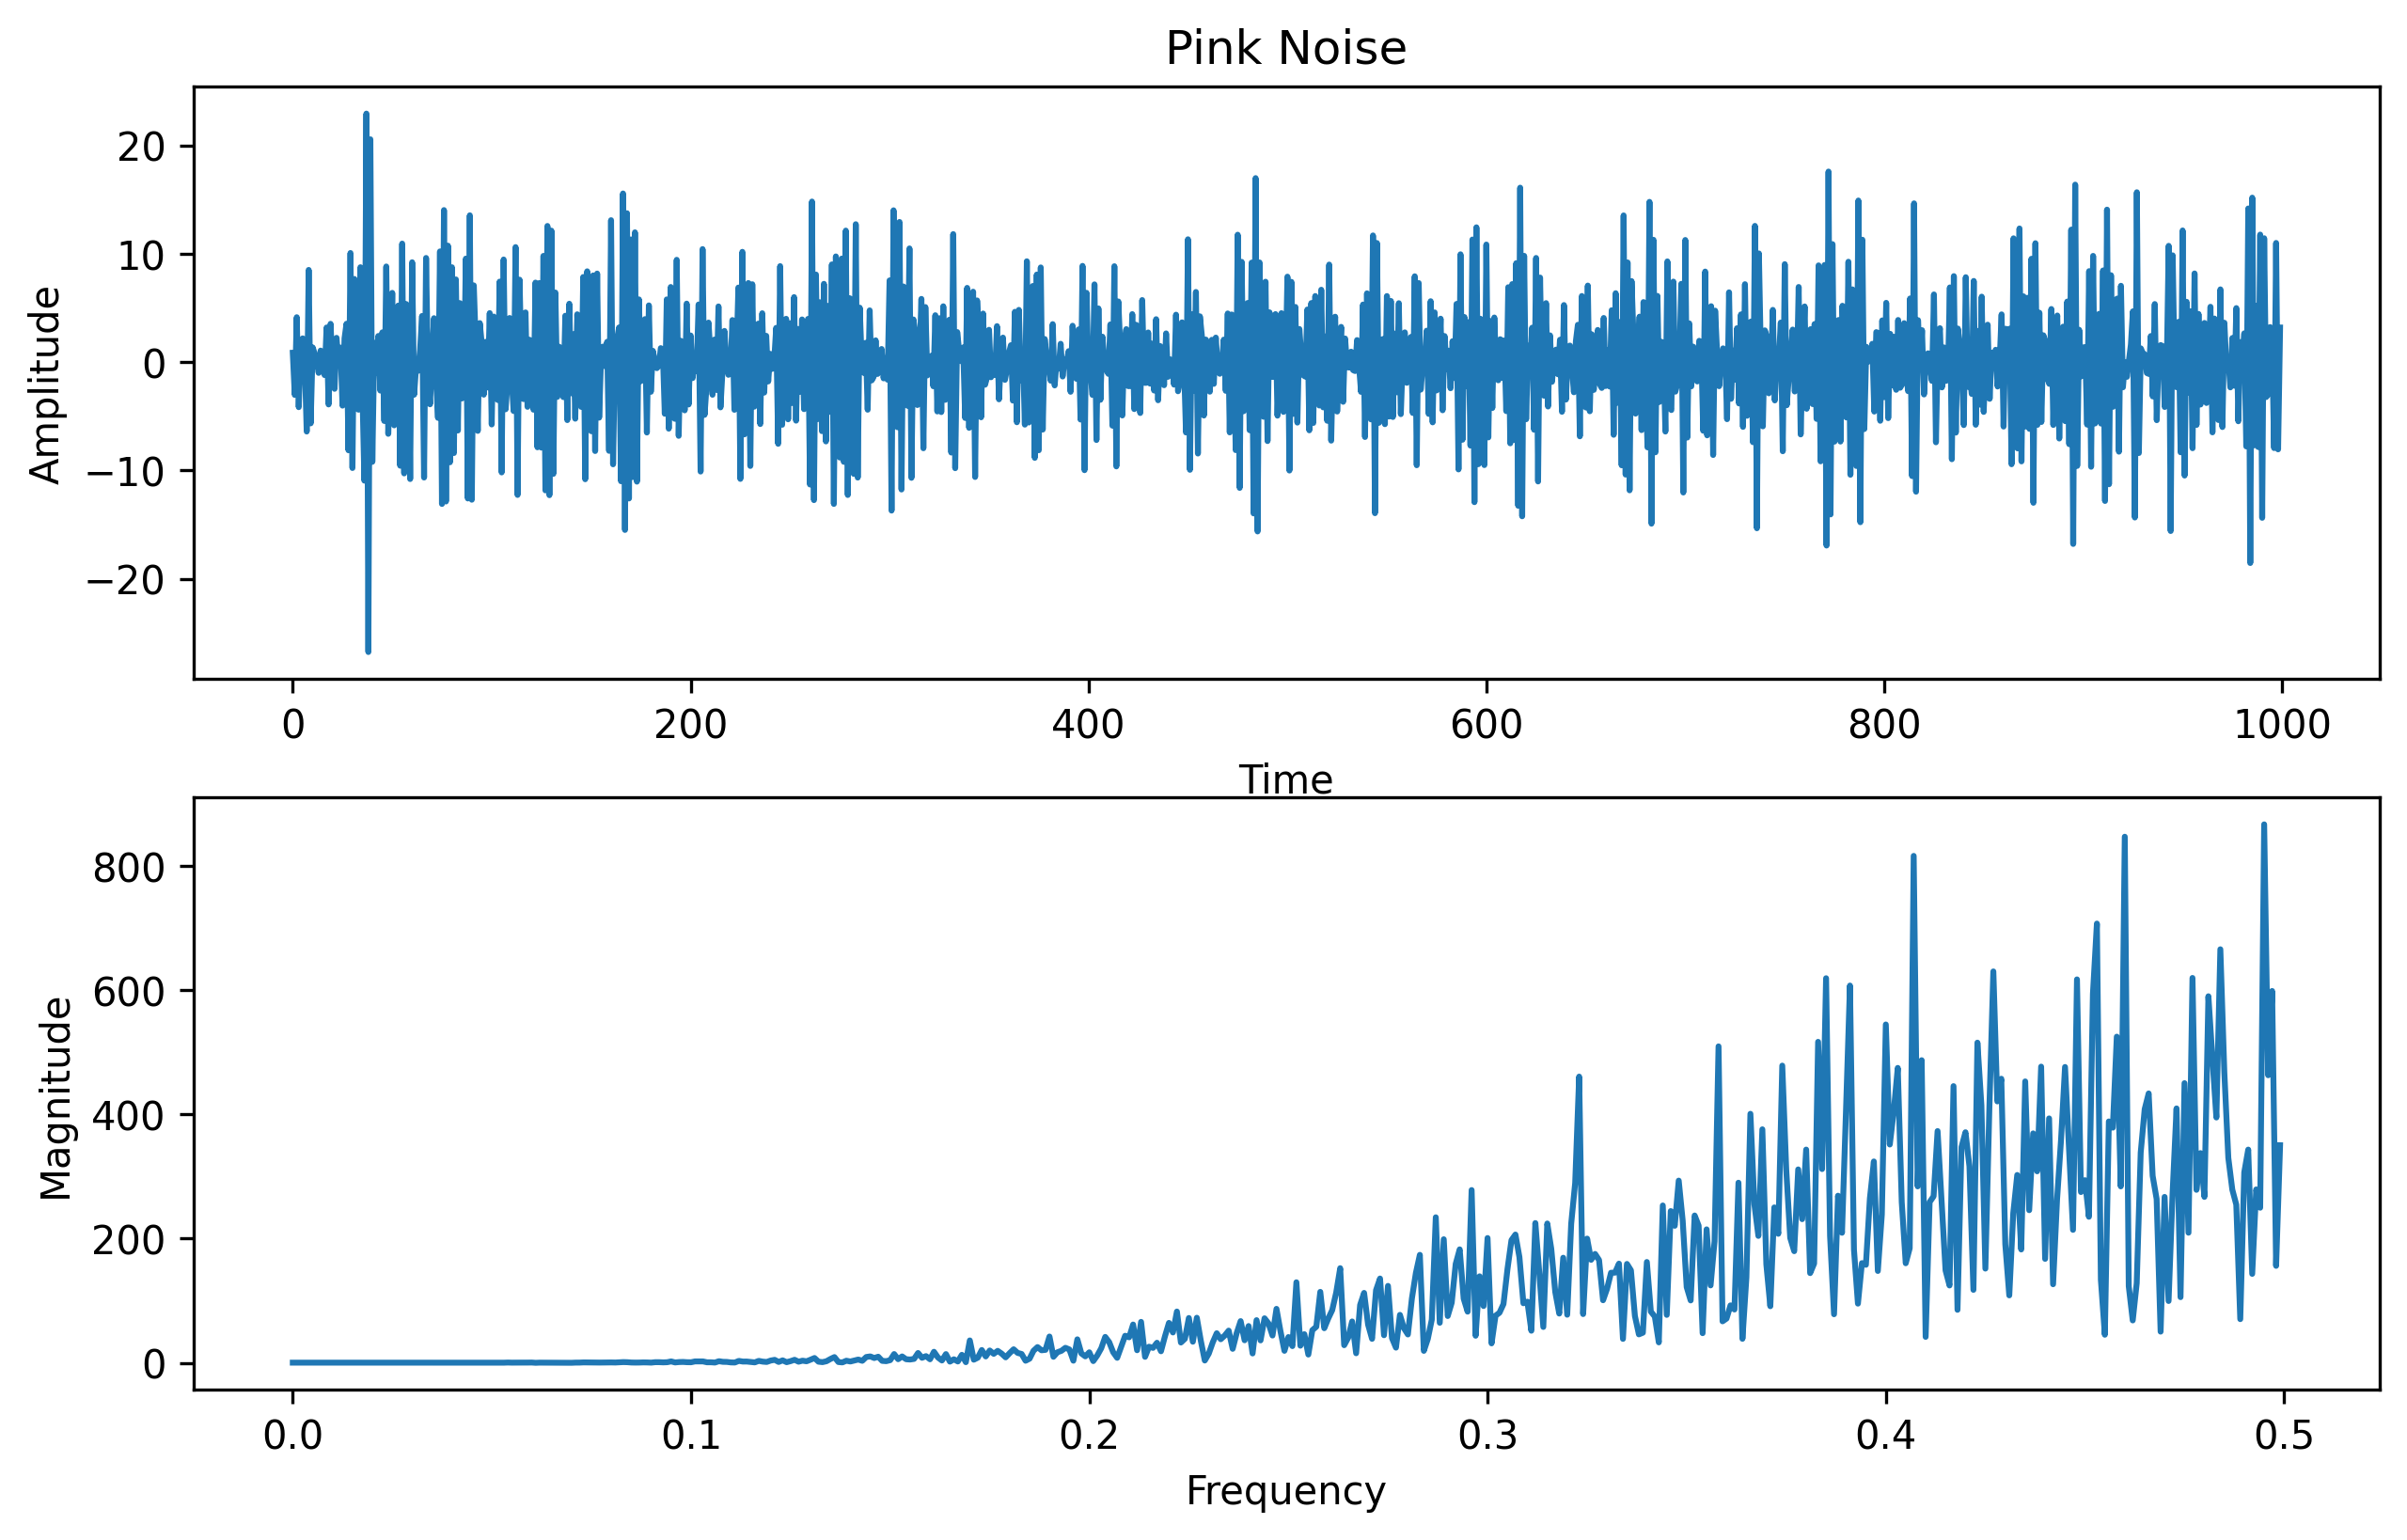 What is pink noise and how is it different from white noise?
